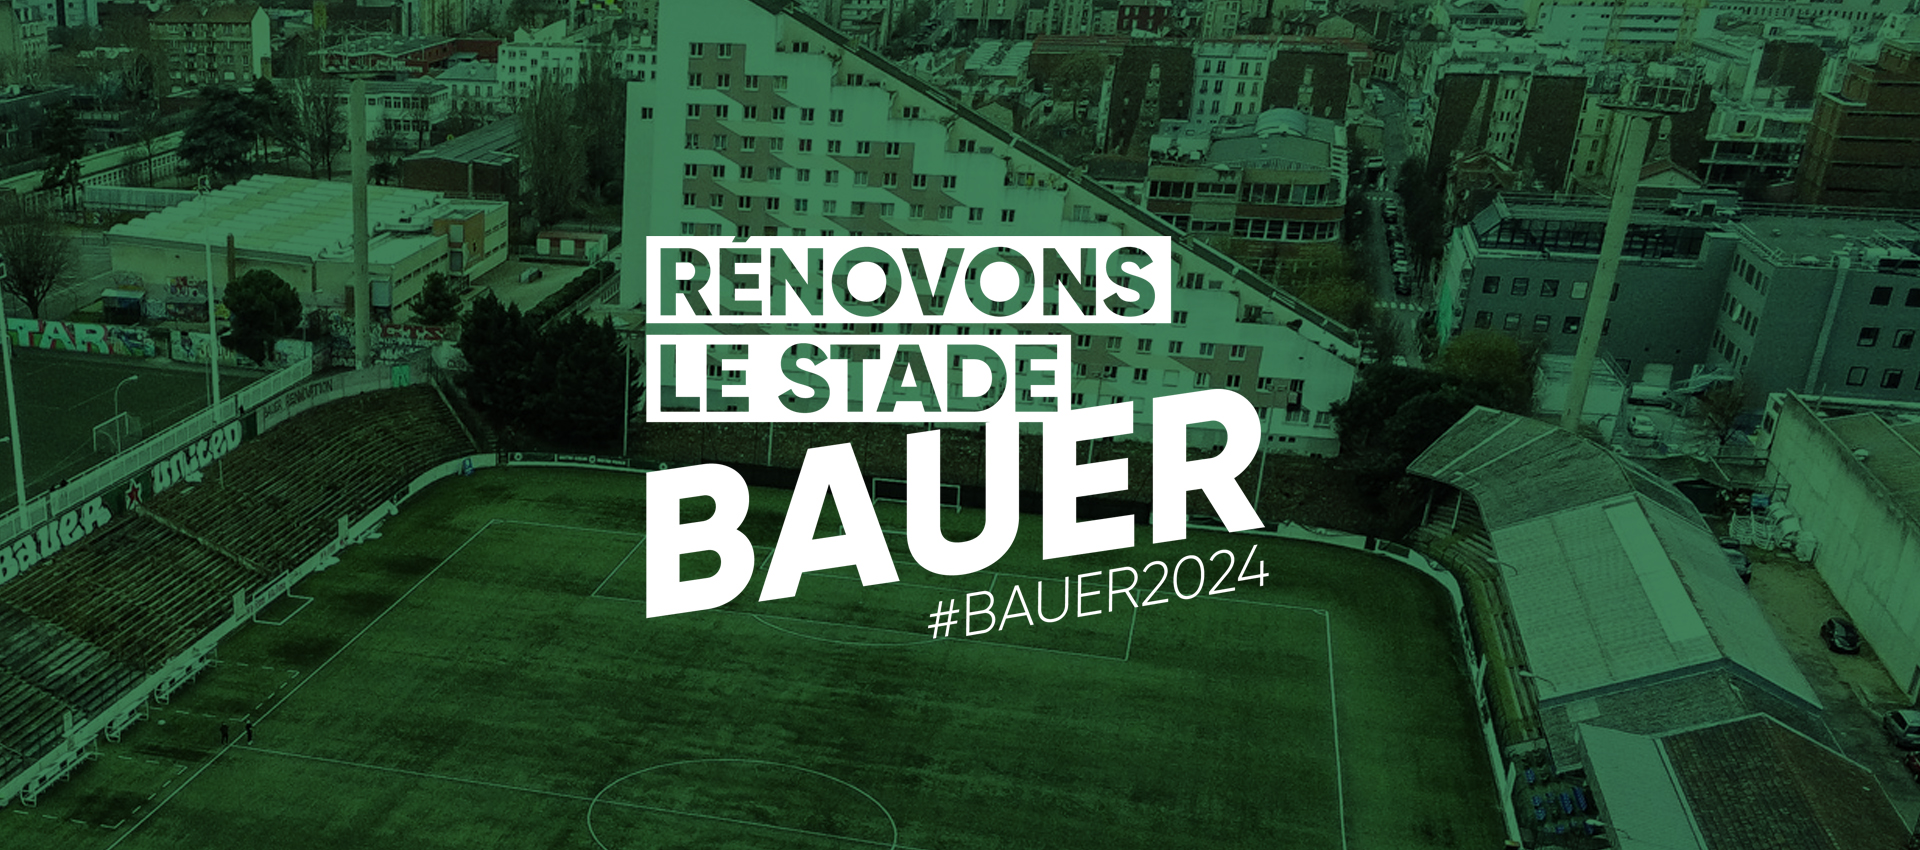 Bauer2024_groupe REALITES